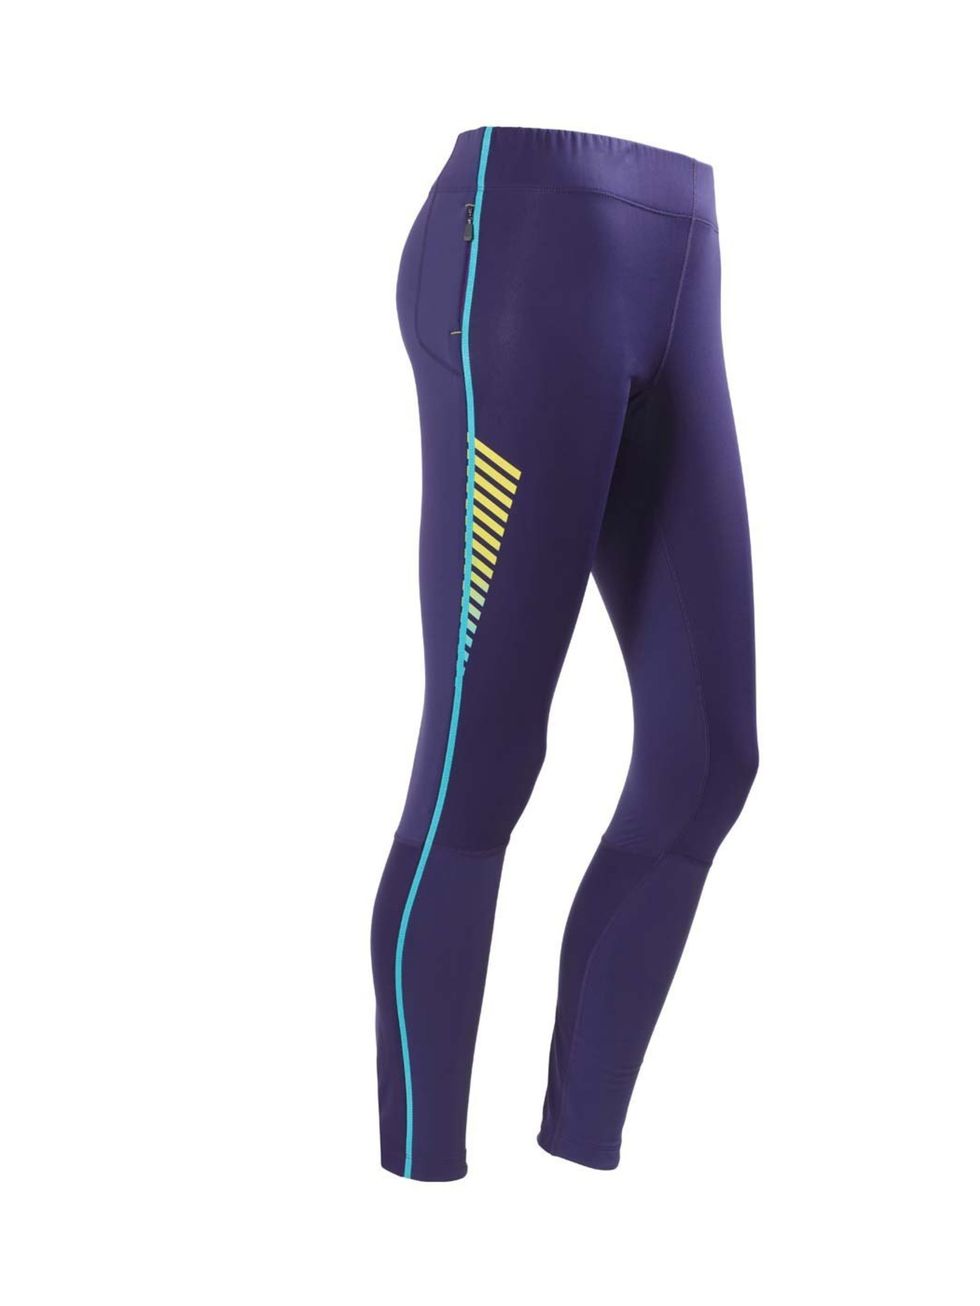 <p>Wind-blocking tights are an absolute must for keeping muscles moving in wintry weather. <a href="http://shop.hellyhansen.com/us/item/w-charger-windblock-tights-48907/">Helly Hansen W Charger Windblock Tights, £75</a></p>